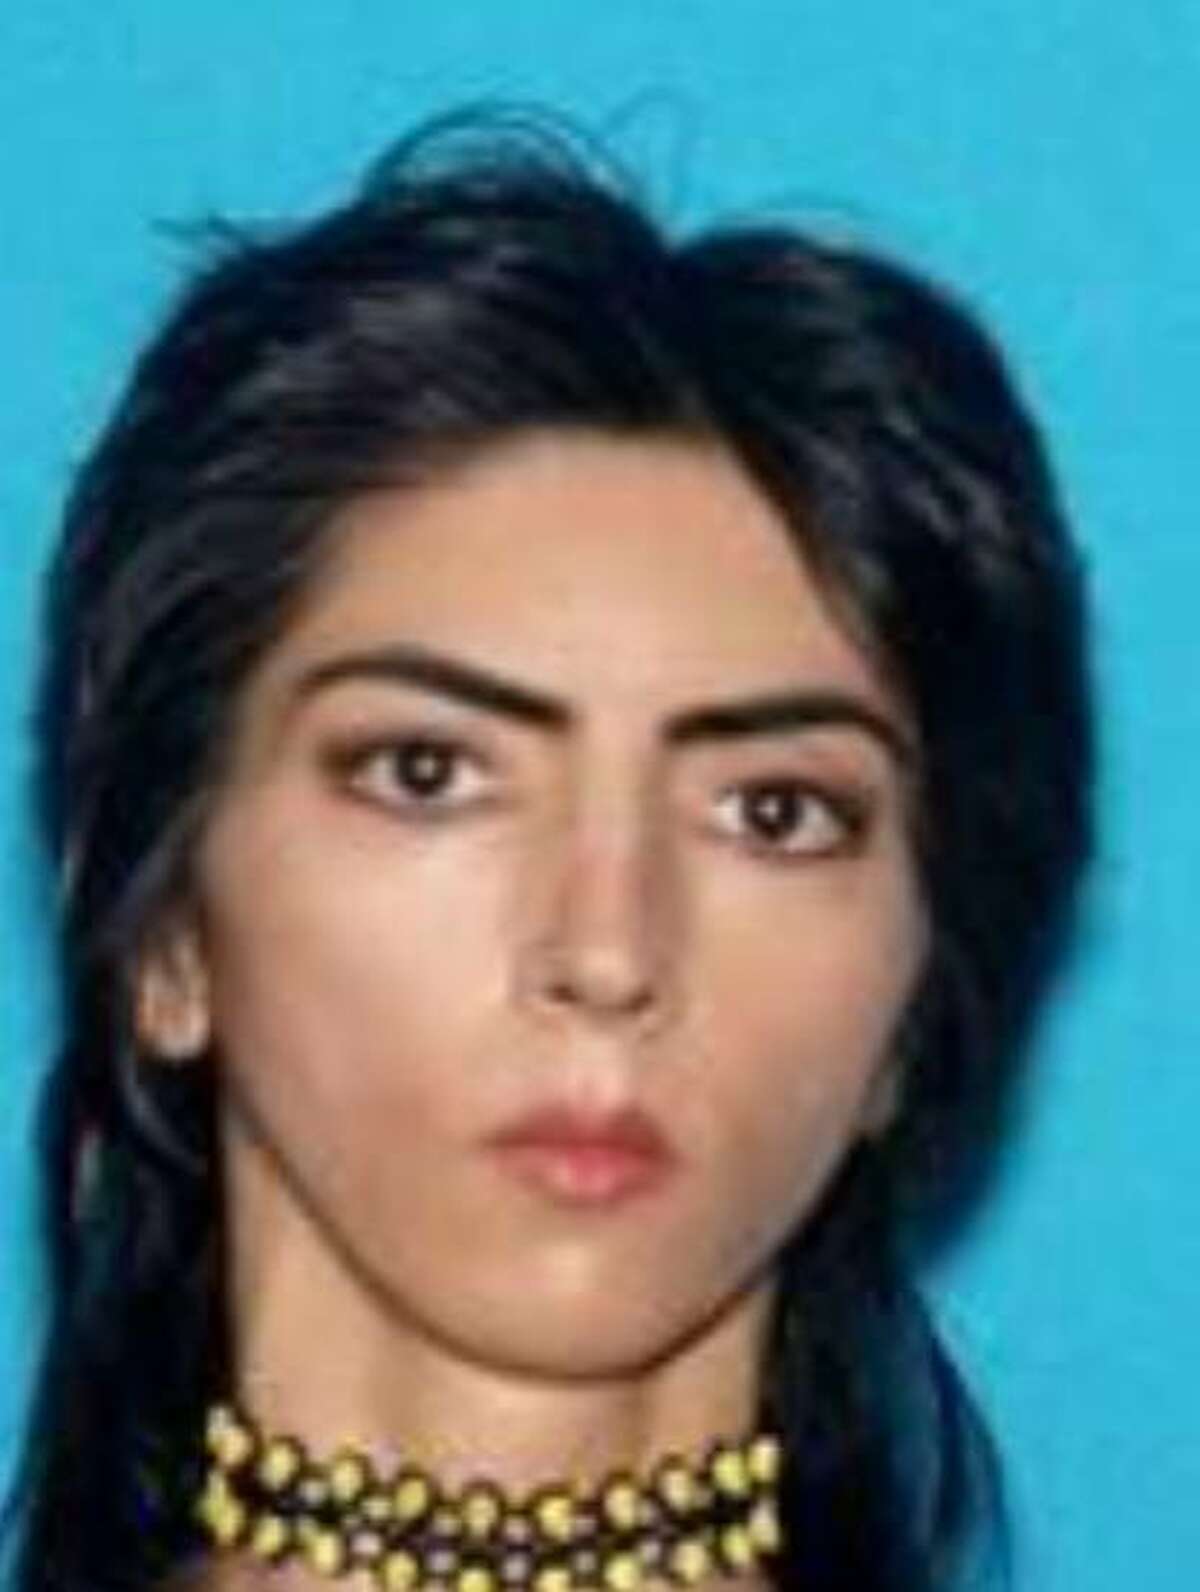 San Bruno police identified Nasim Najafi Aghdam, 39, as the person who shot three people on YouTube's campus Tuesday afternoon. Her social media accounts show that she was increasingly frustrated with the company’s treatment of her videos on the website.